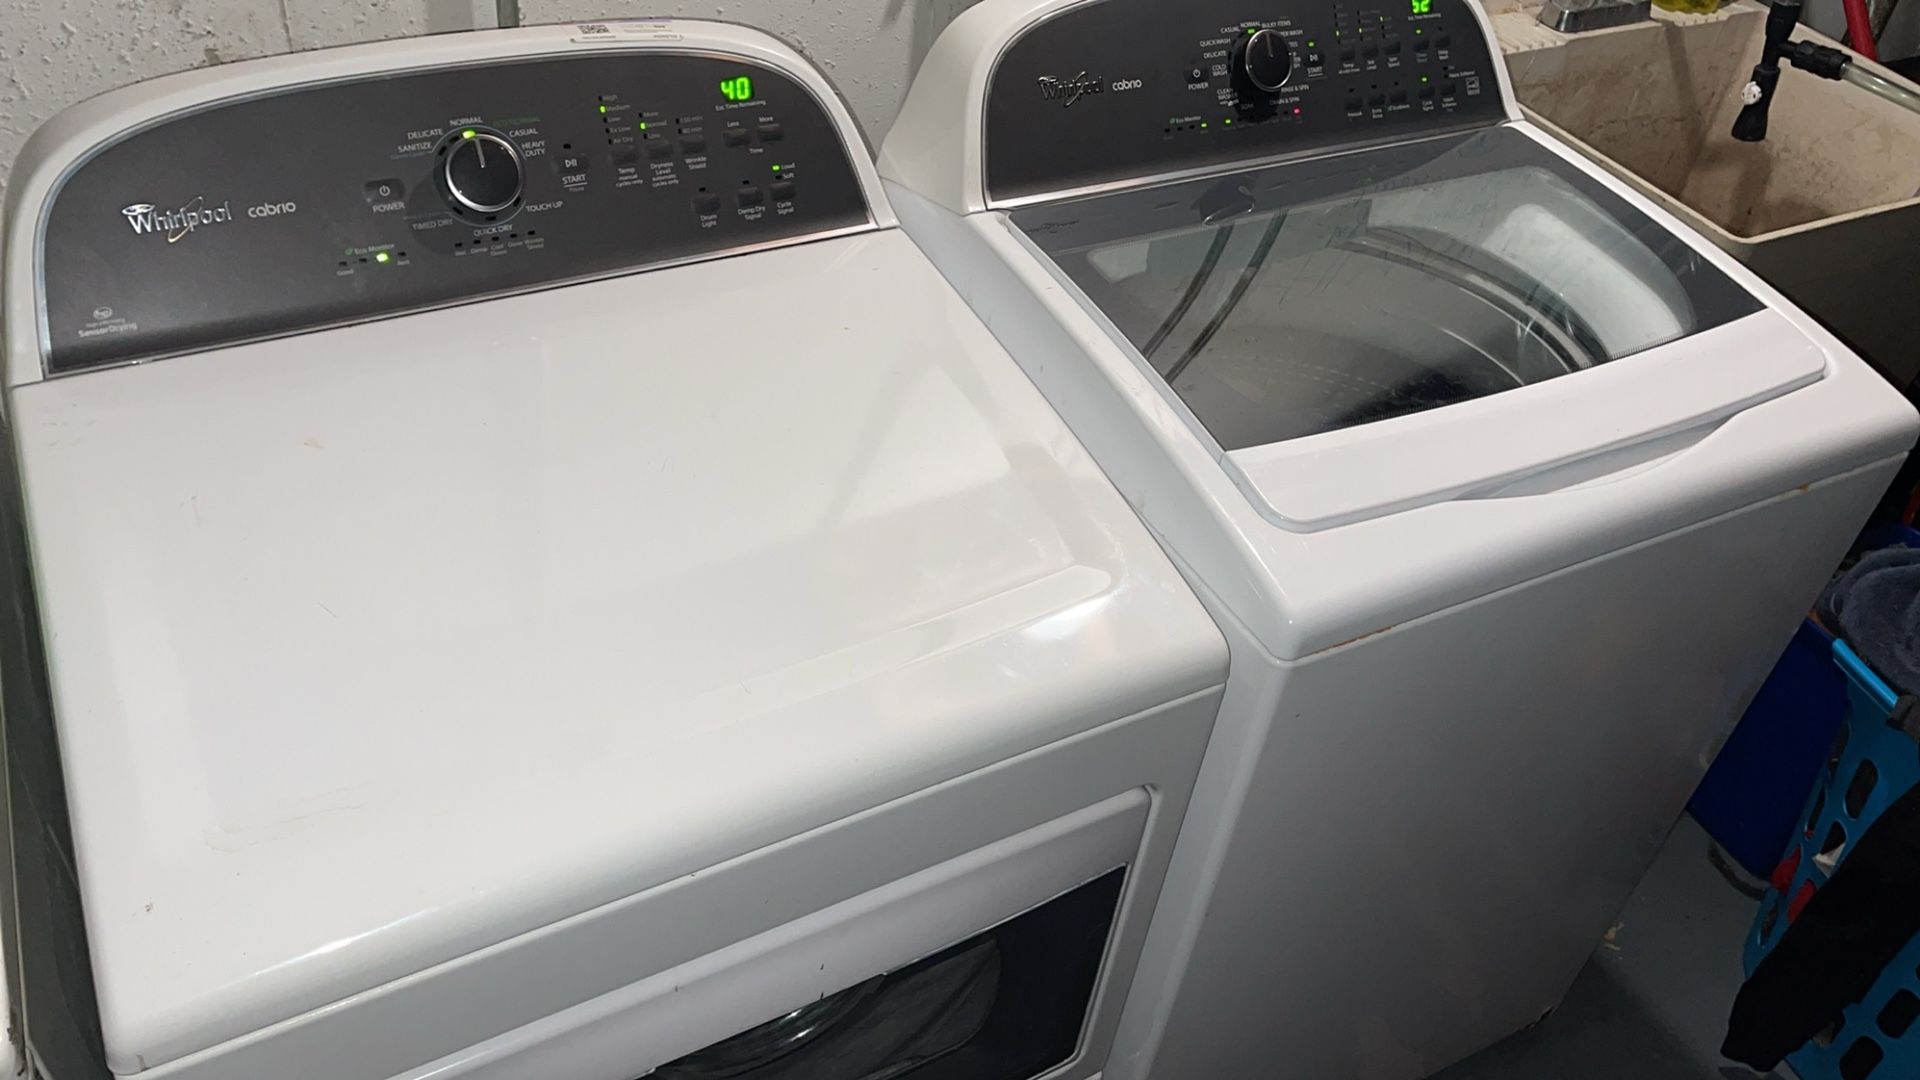 Whirlpool Large Washer And Dryer